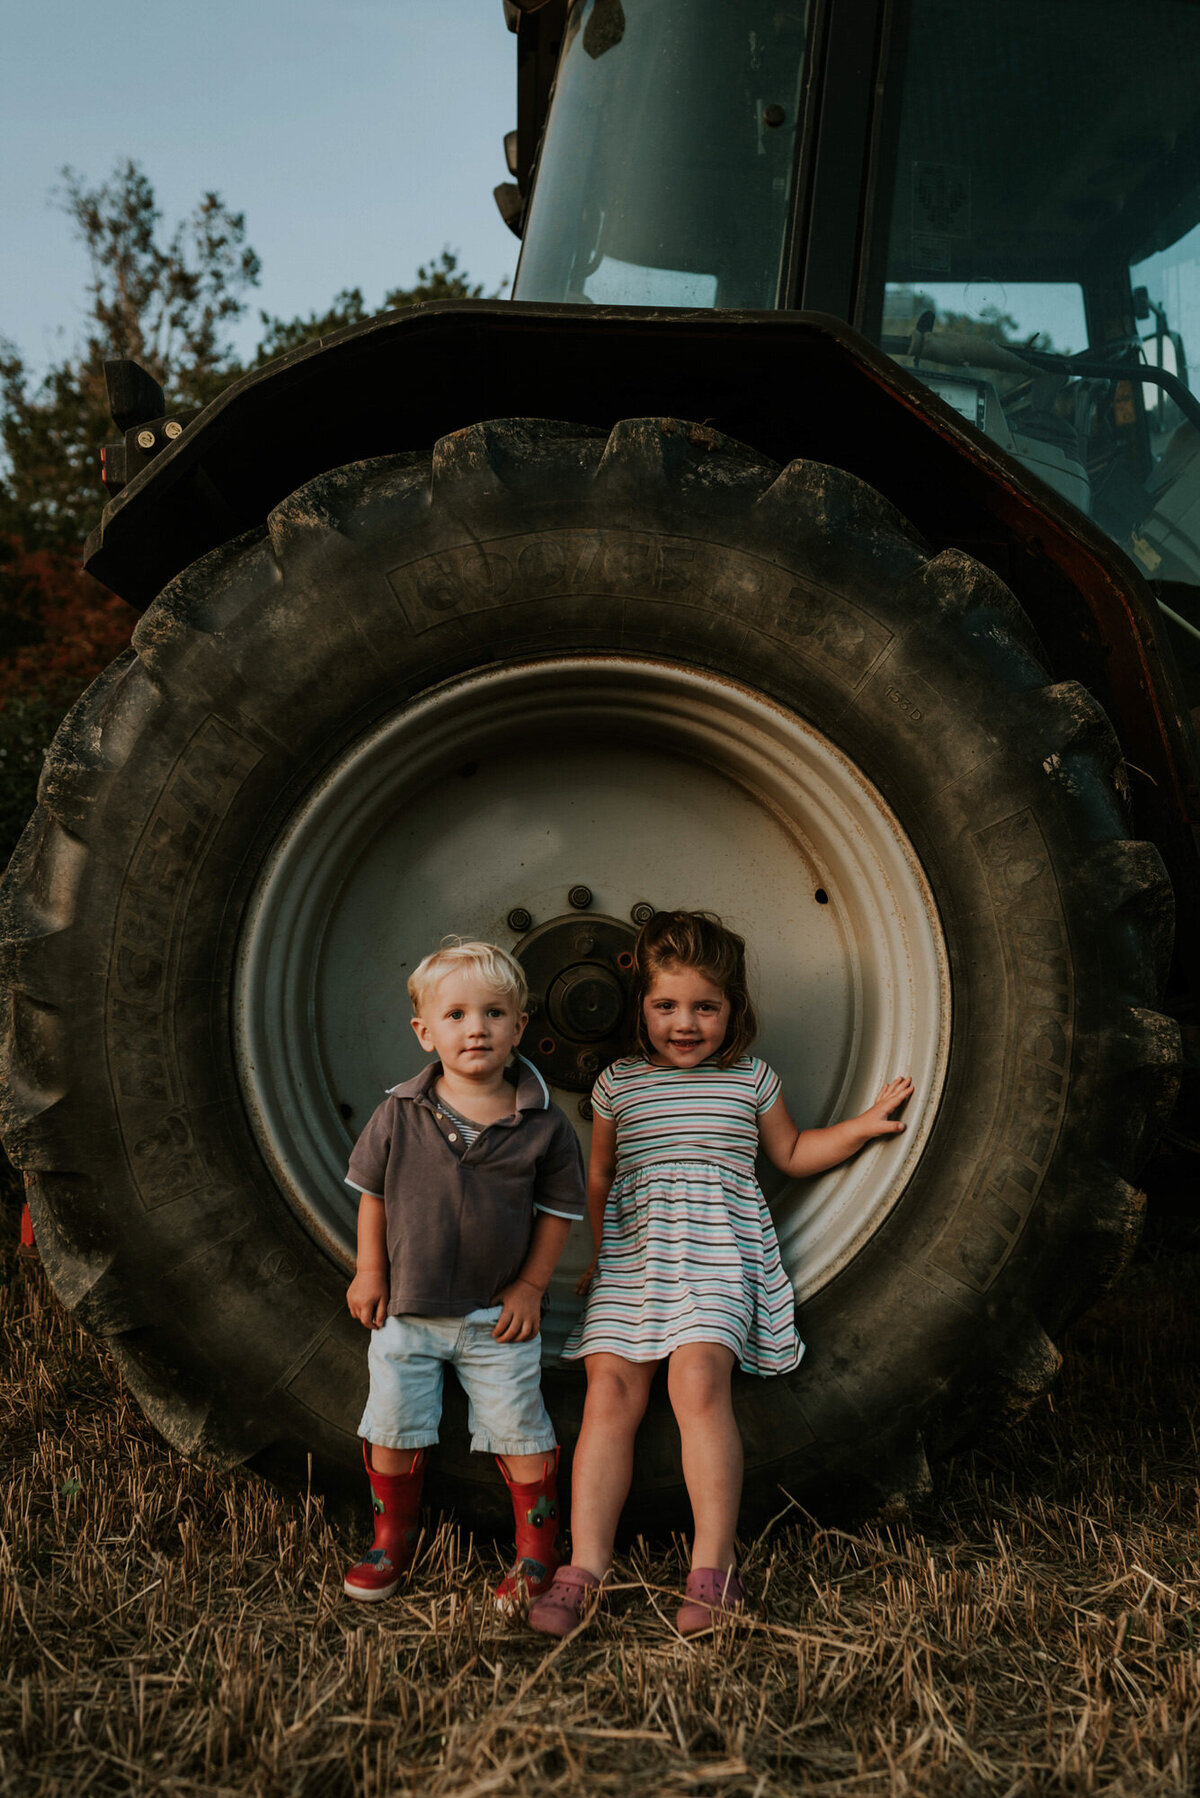 Small children in front of tractor tire